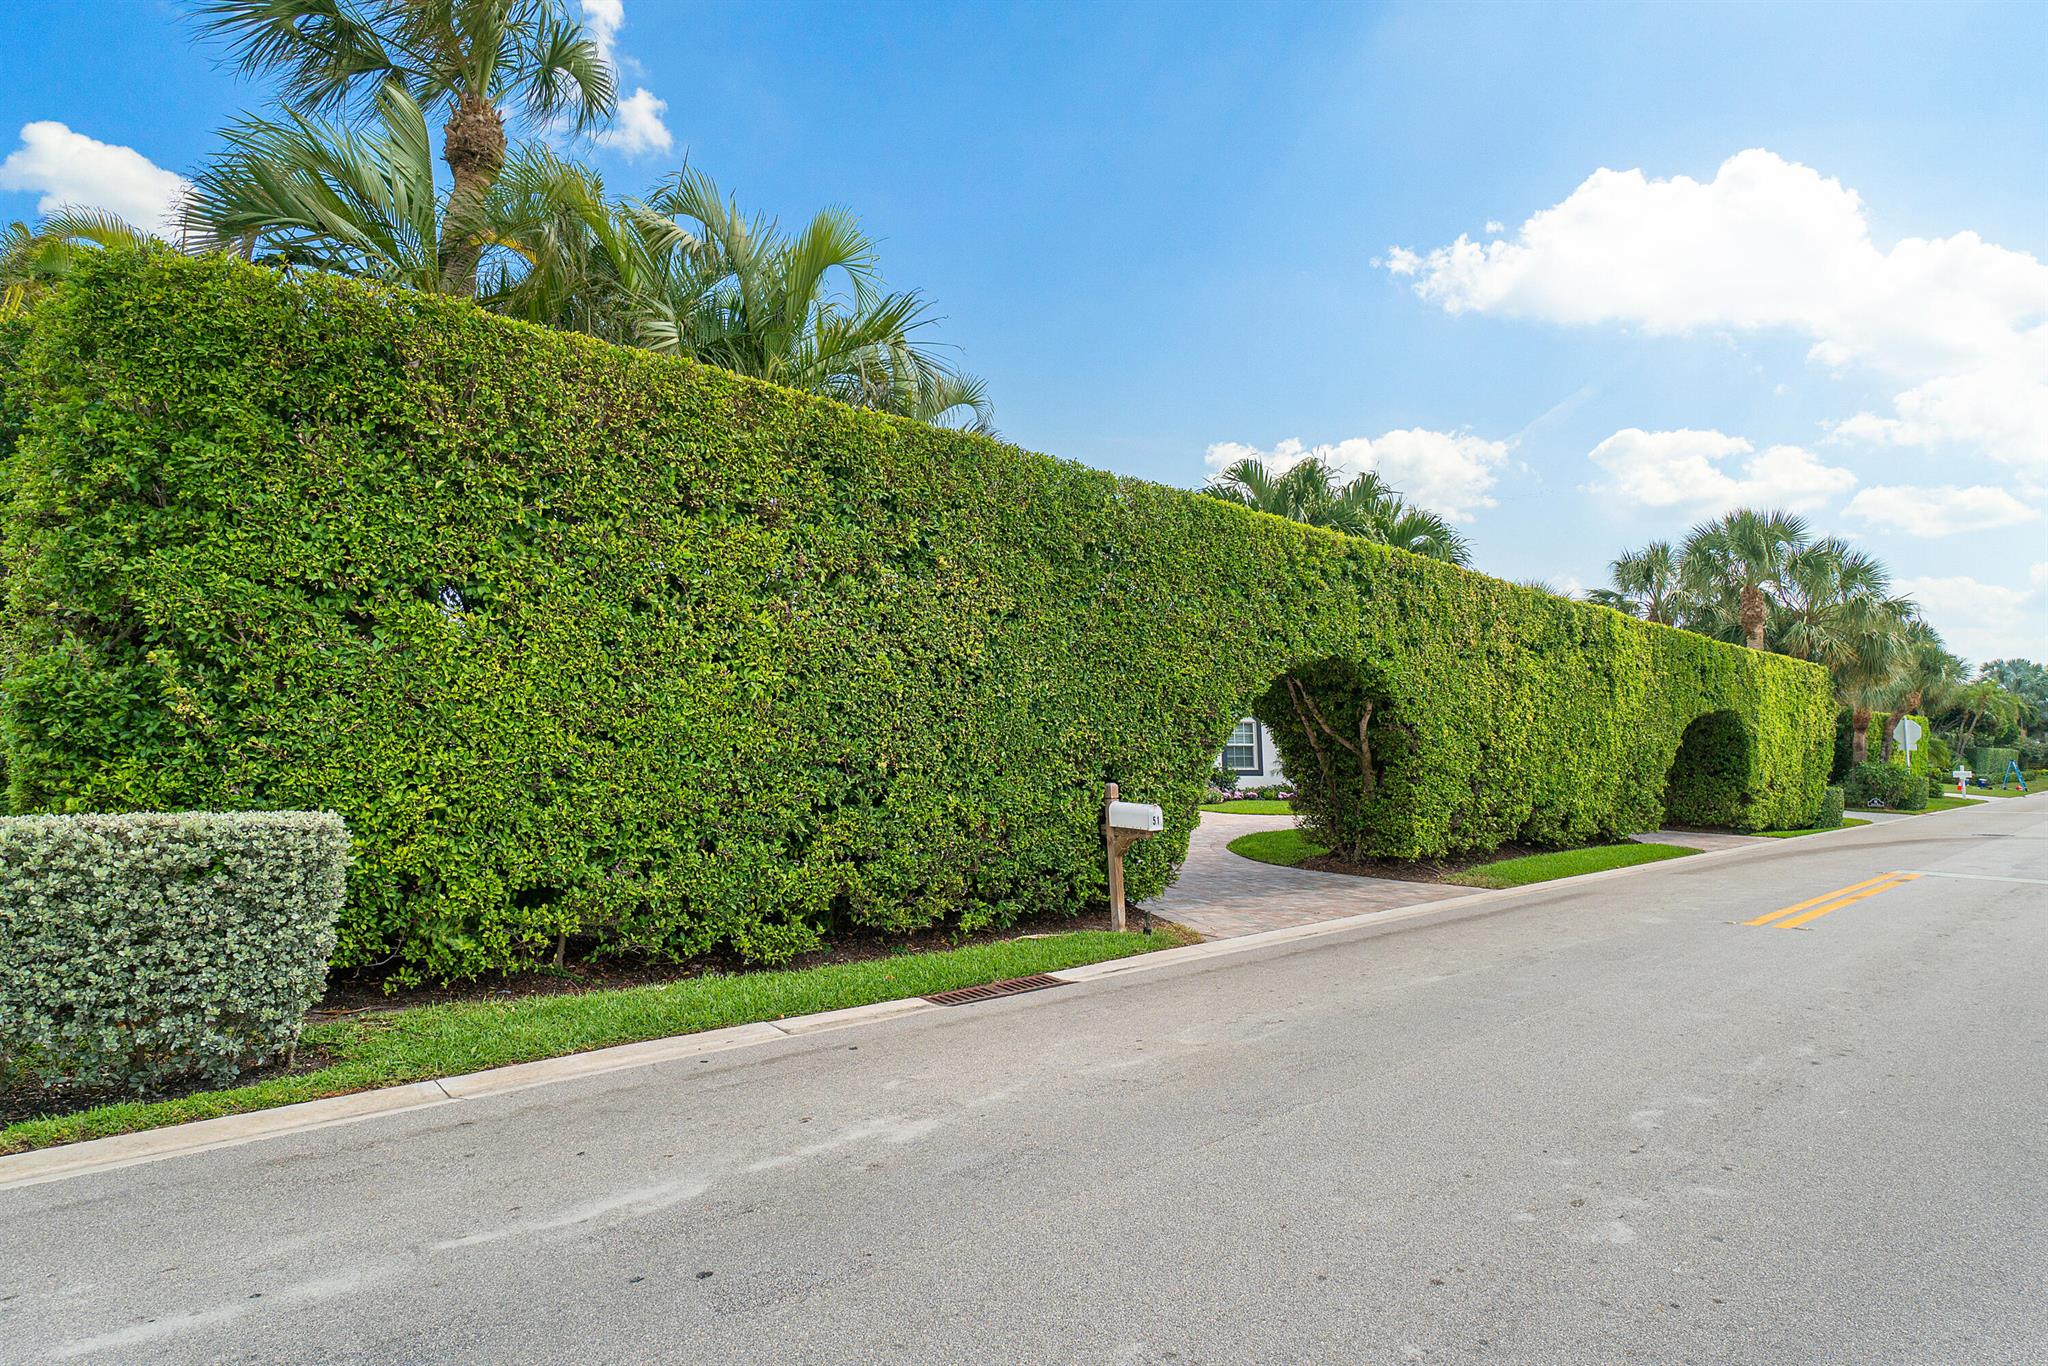 This gem is hidden by large private Palm Beach arched hedges perfectly situated between the Ocean and the Intracoastal on the southern end of the prestigious Jupiter Island, and just steps away from the beach! With a new roof, step inside and take in the beautiful French Oak flooring and vaulted ceiling, and a kitchen that has stunning Carrara marble & equipped with high-end appliances. When you want to relax, just step into your primary bedroom, and enjoy the feel of a European spa or head to your private oasis of a backyard to take a swim in your pool. With complete hurricane impacted windows, this home was completely reconstructed in 2008 & the attached cabana was designed to be the perfect place for guests, mother in-law suite, nanny quarters, or an office escape from the main house Location, Location, Location! You can kayak, paddleboard, or jetski STEPS away from the Intracoastal or take a dip in the Atlantic Ocean. A short walk away to the JIB marina, private beach club &amp; Coral Cove Park. Surrounded by top local places to eat such as Guanabanas, Lucky Shuck, Blackbird &amp;  Michael Jordan's restaurant-1000 North. Less than 25 minutes from the PBI Airport. Jupiter Inlet Colony also has its own private police station.